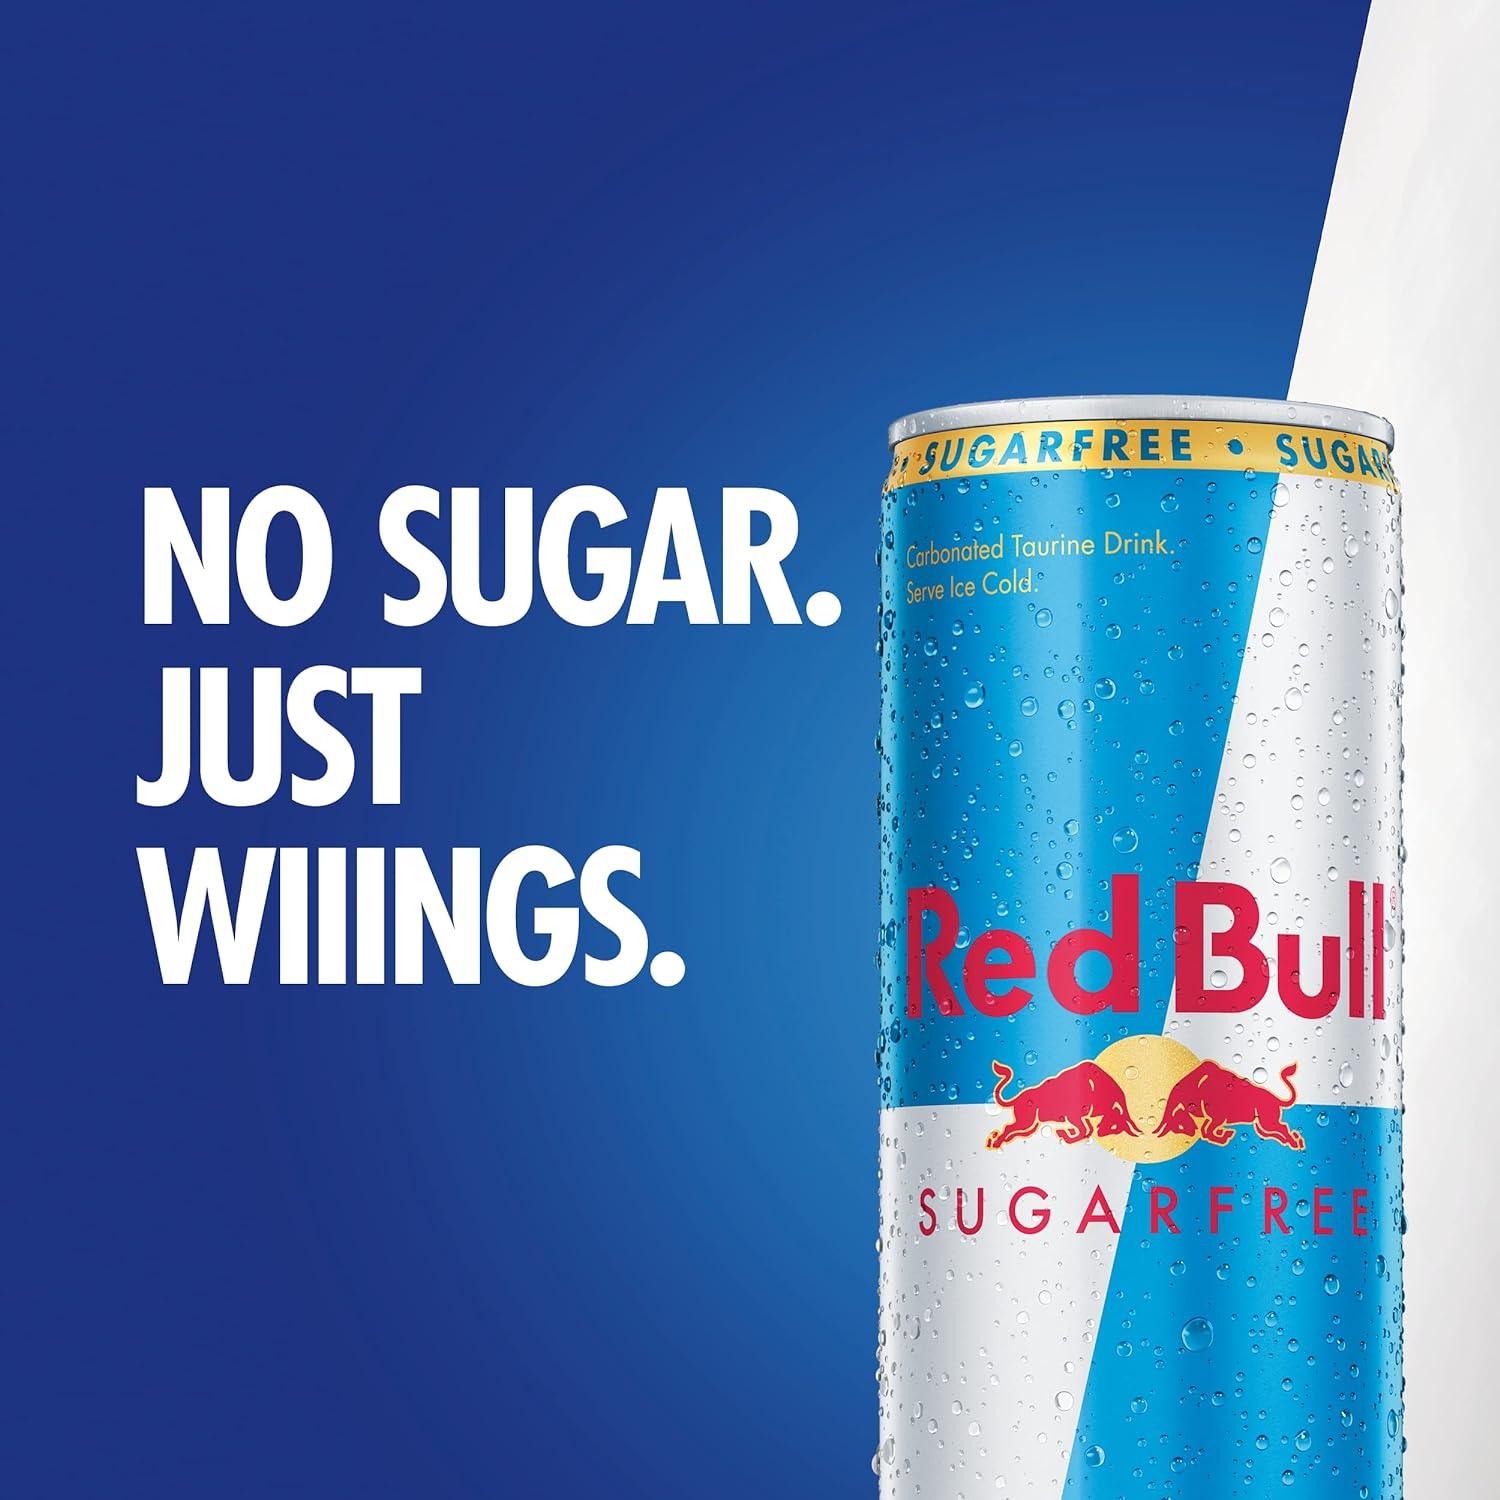 Red Bull Energy Drink Sugar Free 250ml x 24 Cans - Vending Superstore